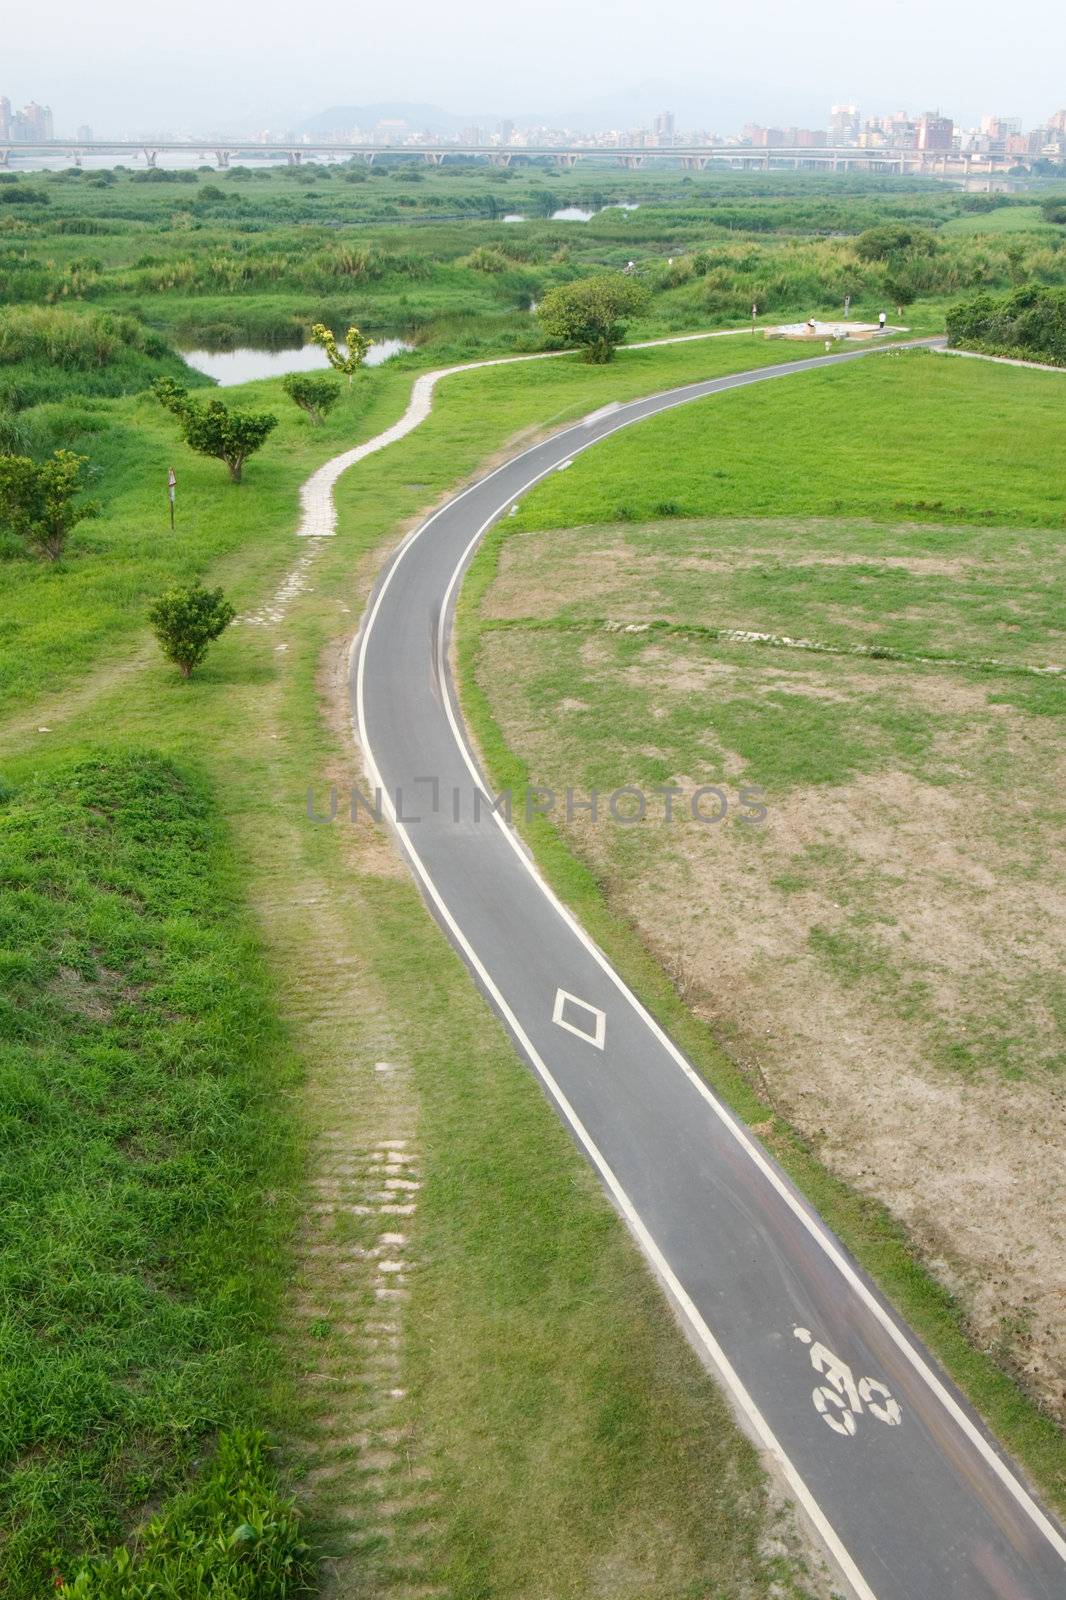 It is a road for bicycle on the grassland.